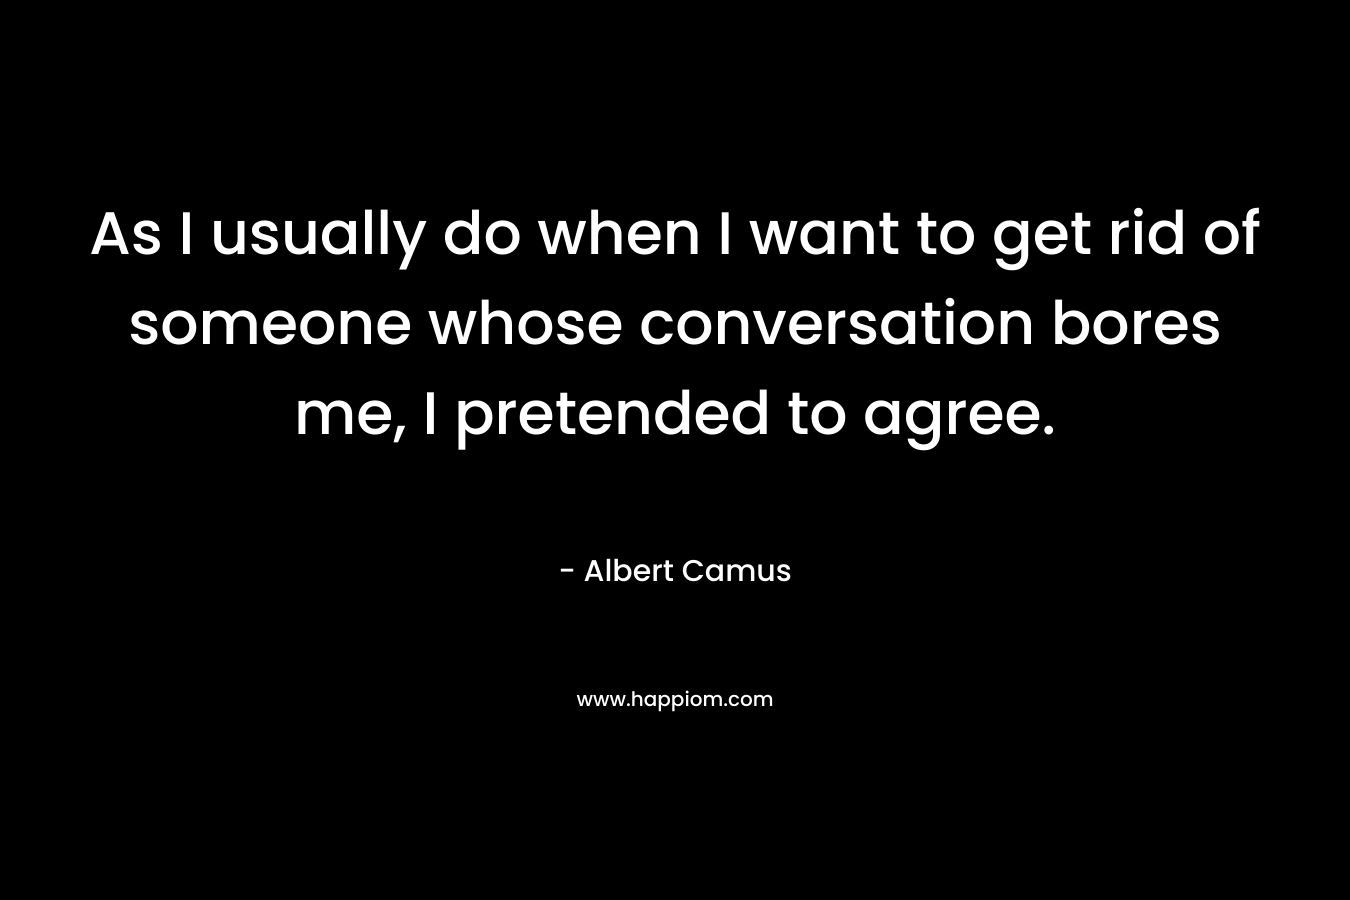 As I usually do when I want to get rid of someone whose conversation bores me, I pretended to agree. – Albert Camus